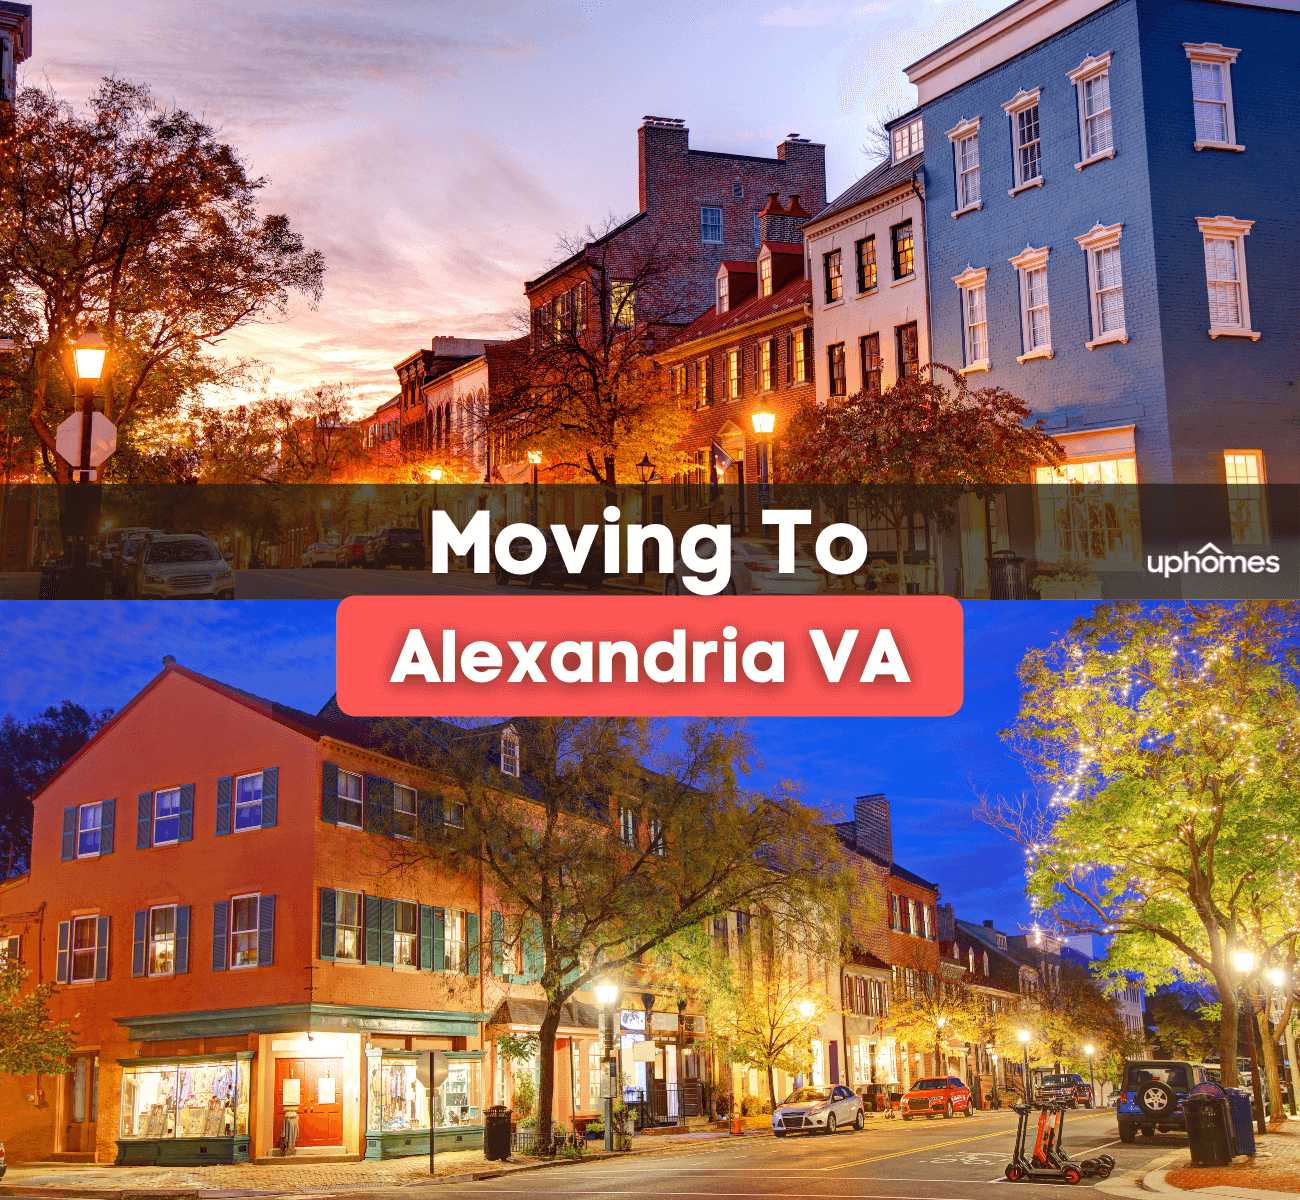 Moving to Alexandria, VA - What is it like living in Alexandria Virginia?